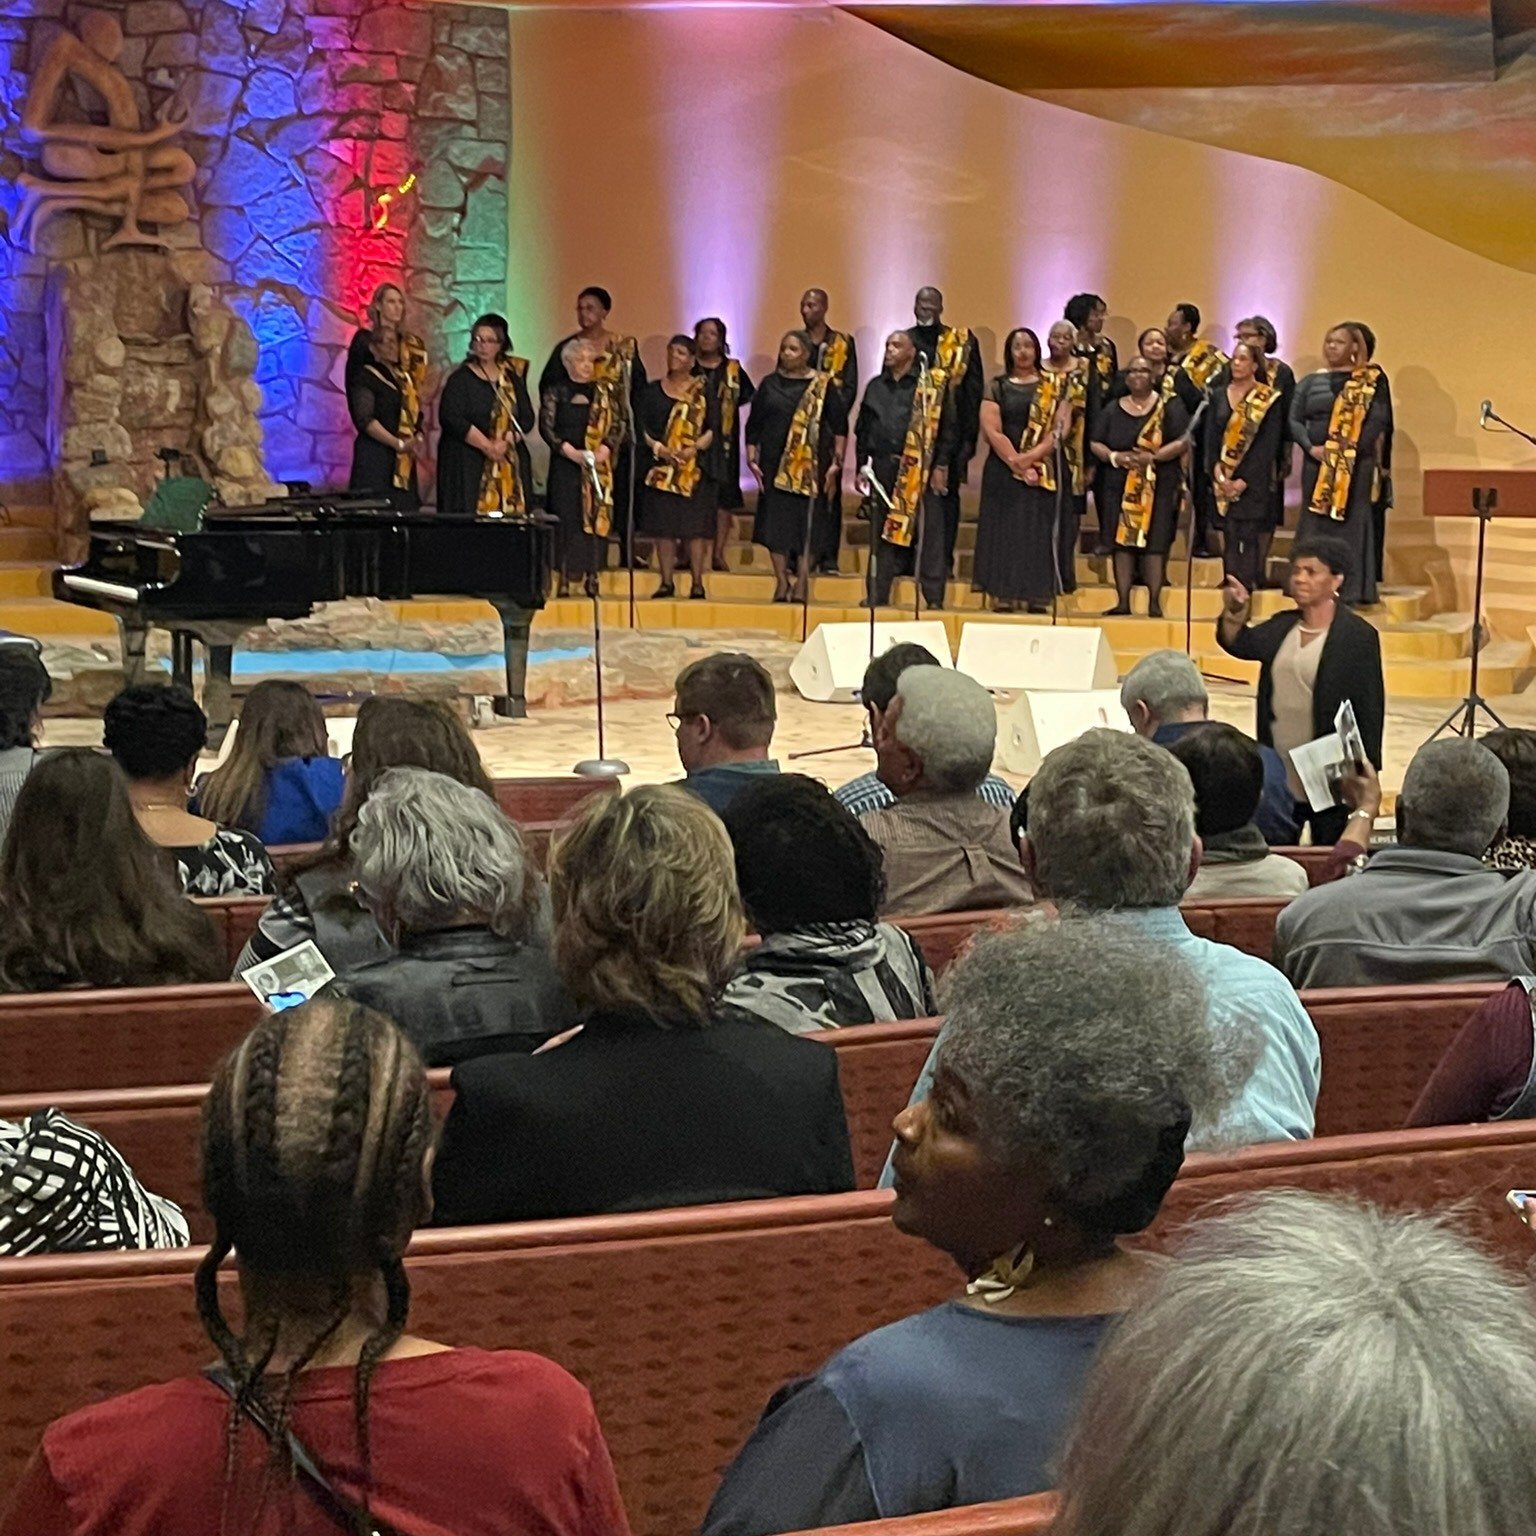 If you missed last night's joy-filled Opera Goes to Church! performance at Zion Global Ministries, don't panic! A few tickets are still available for tonight's (April 23) repeat performance at 7 p.m. Reserve your free tickets at cincinnatiopera.org/c